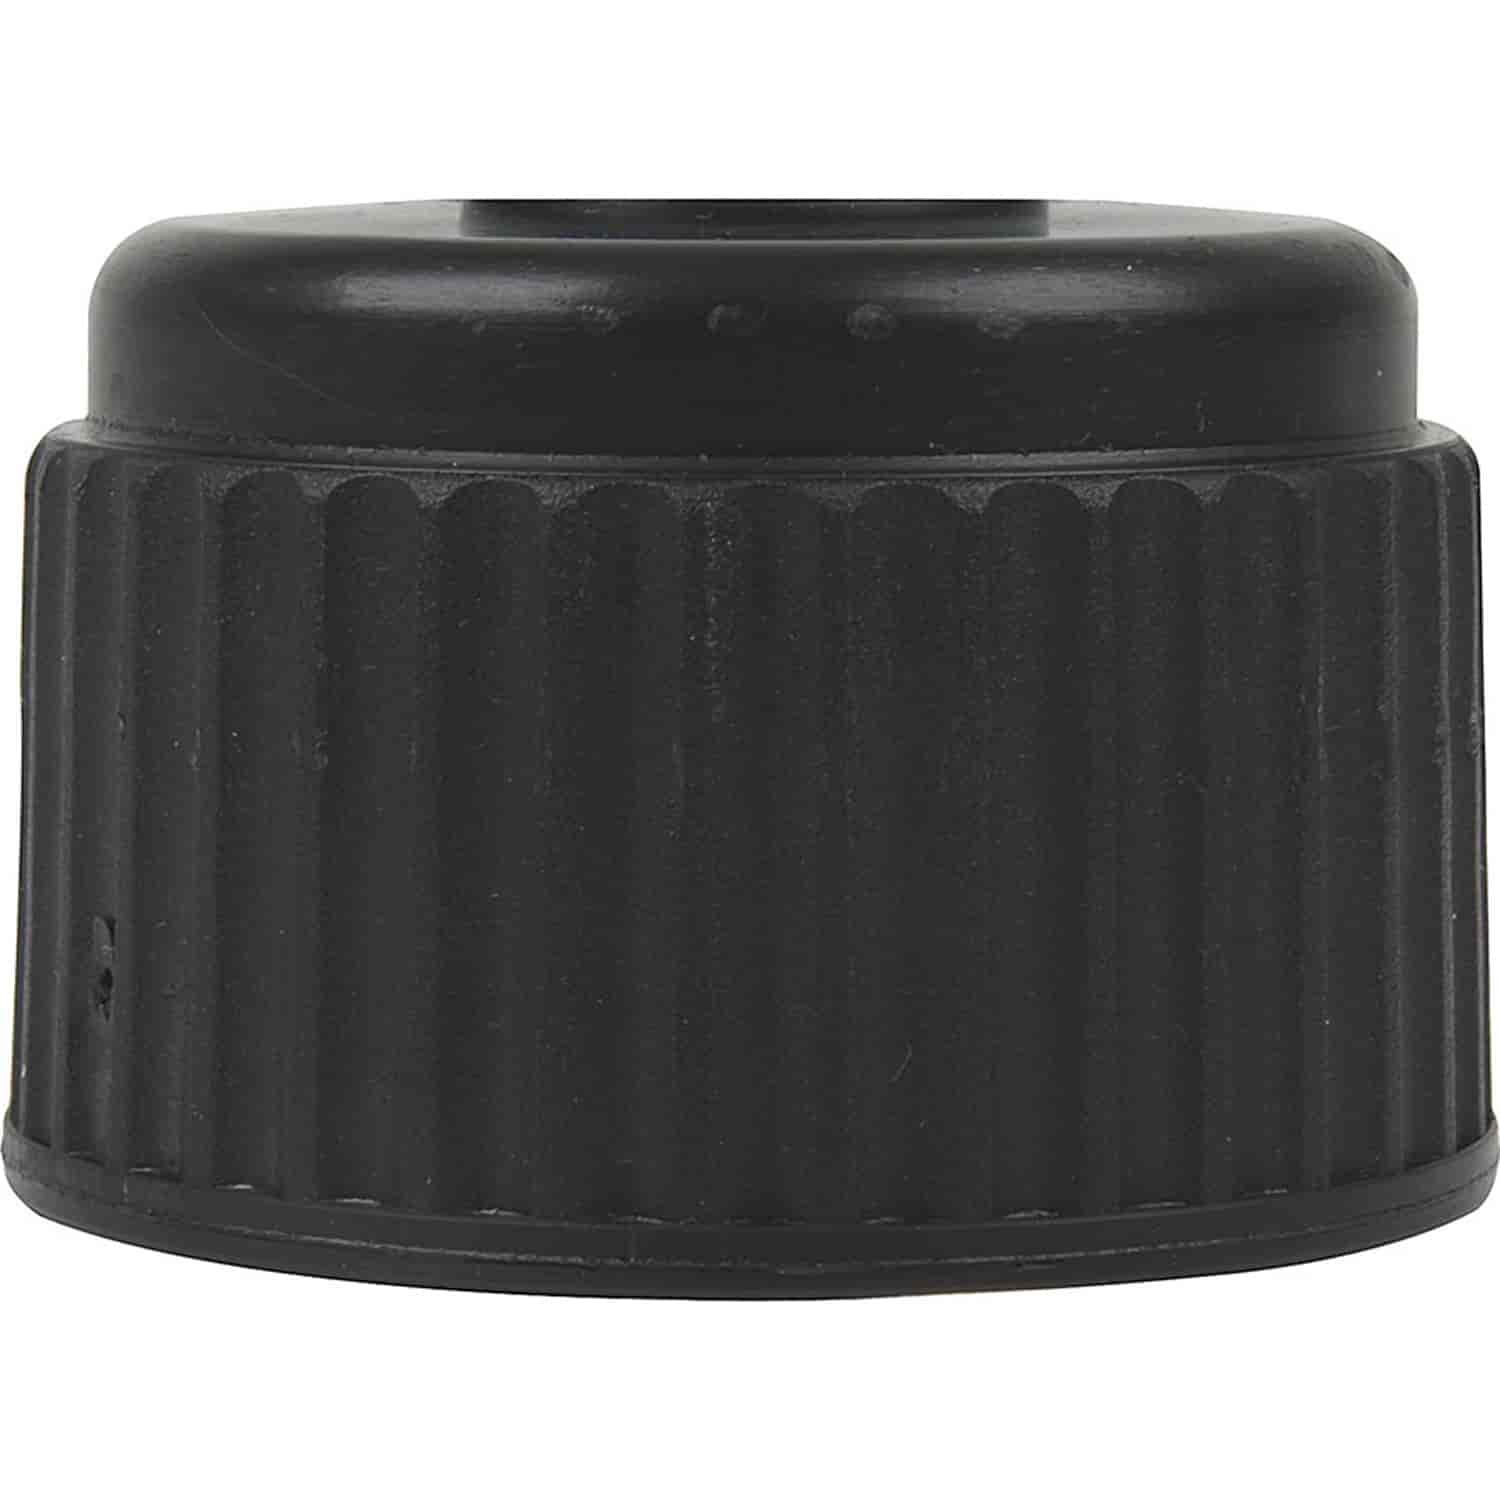 Pump Cap Only For Use With VP Jug